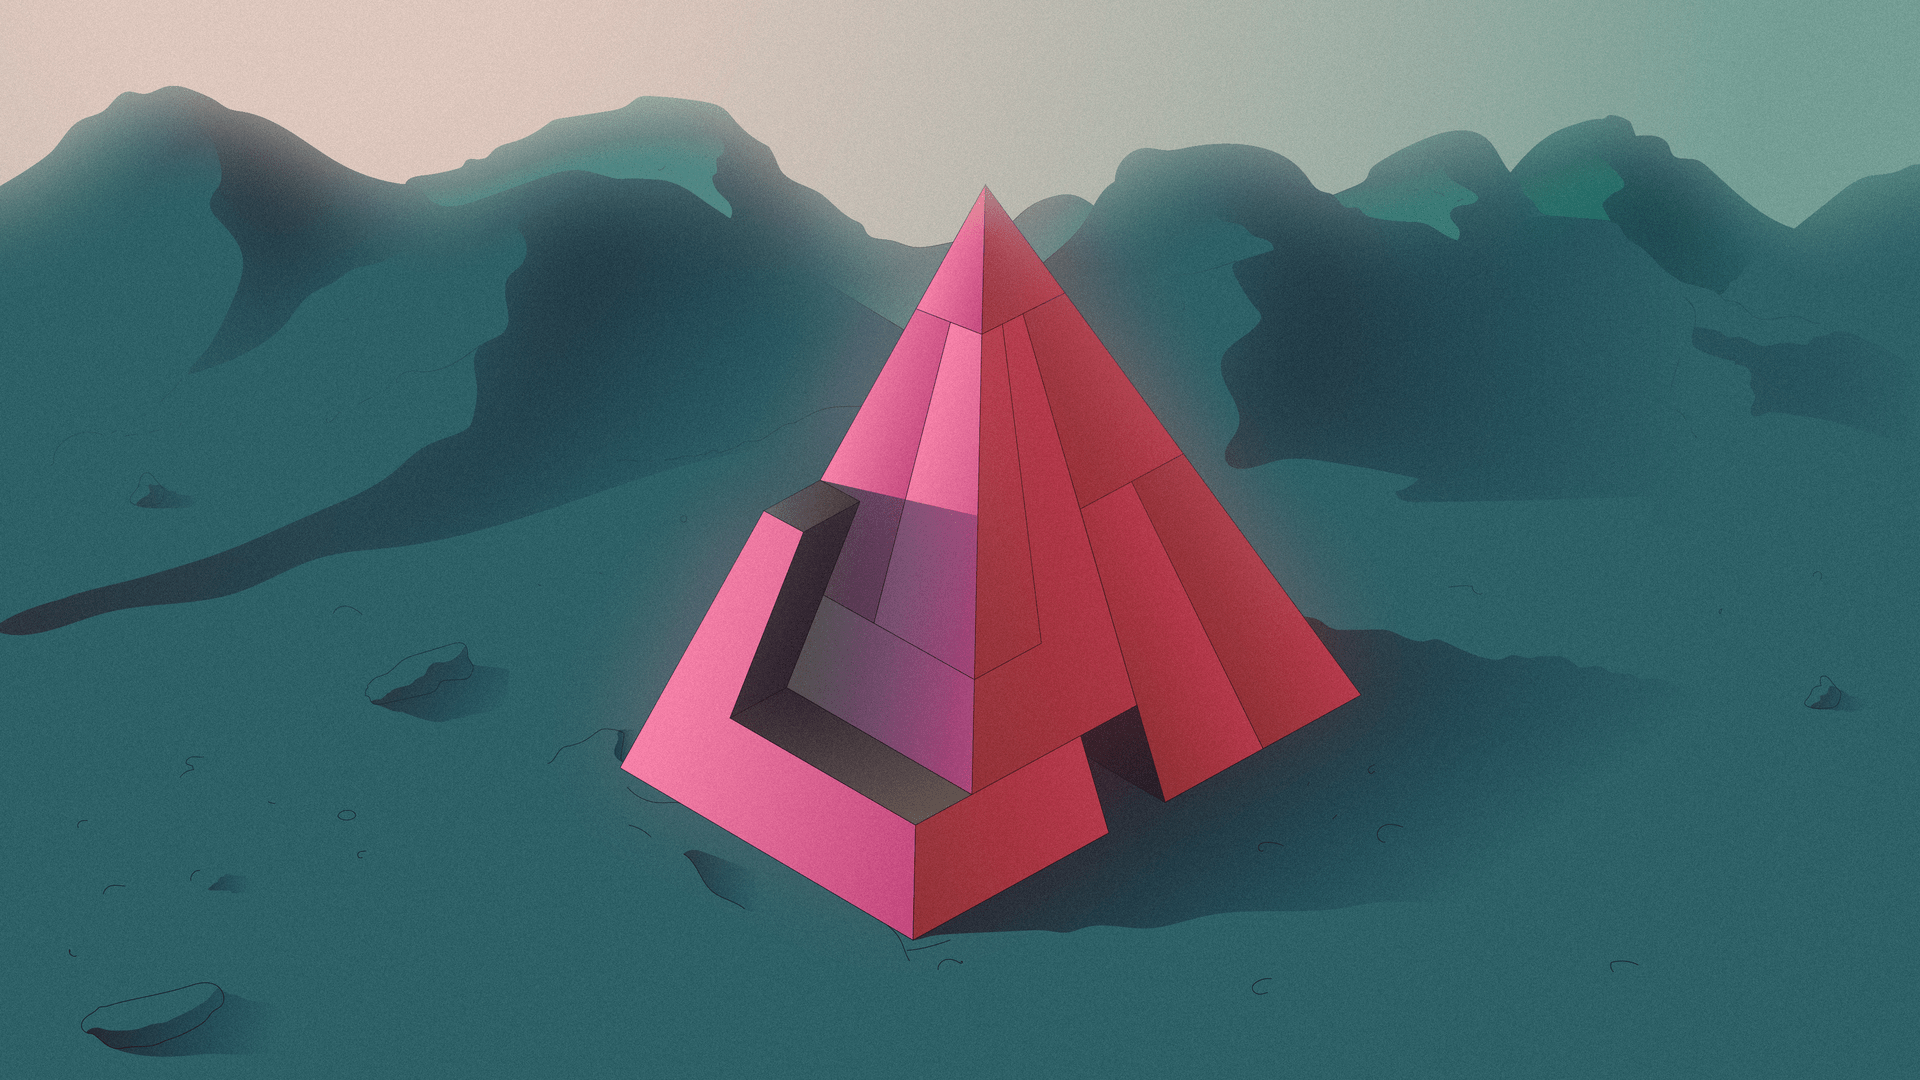 Illustration of an unsolved volumetric puzzle, sitting on a mountainous landscape.